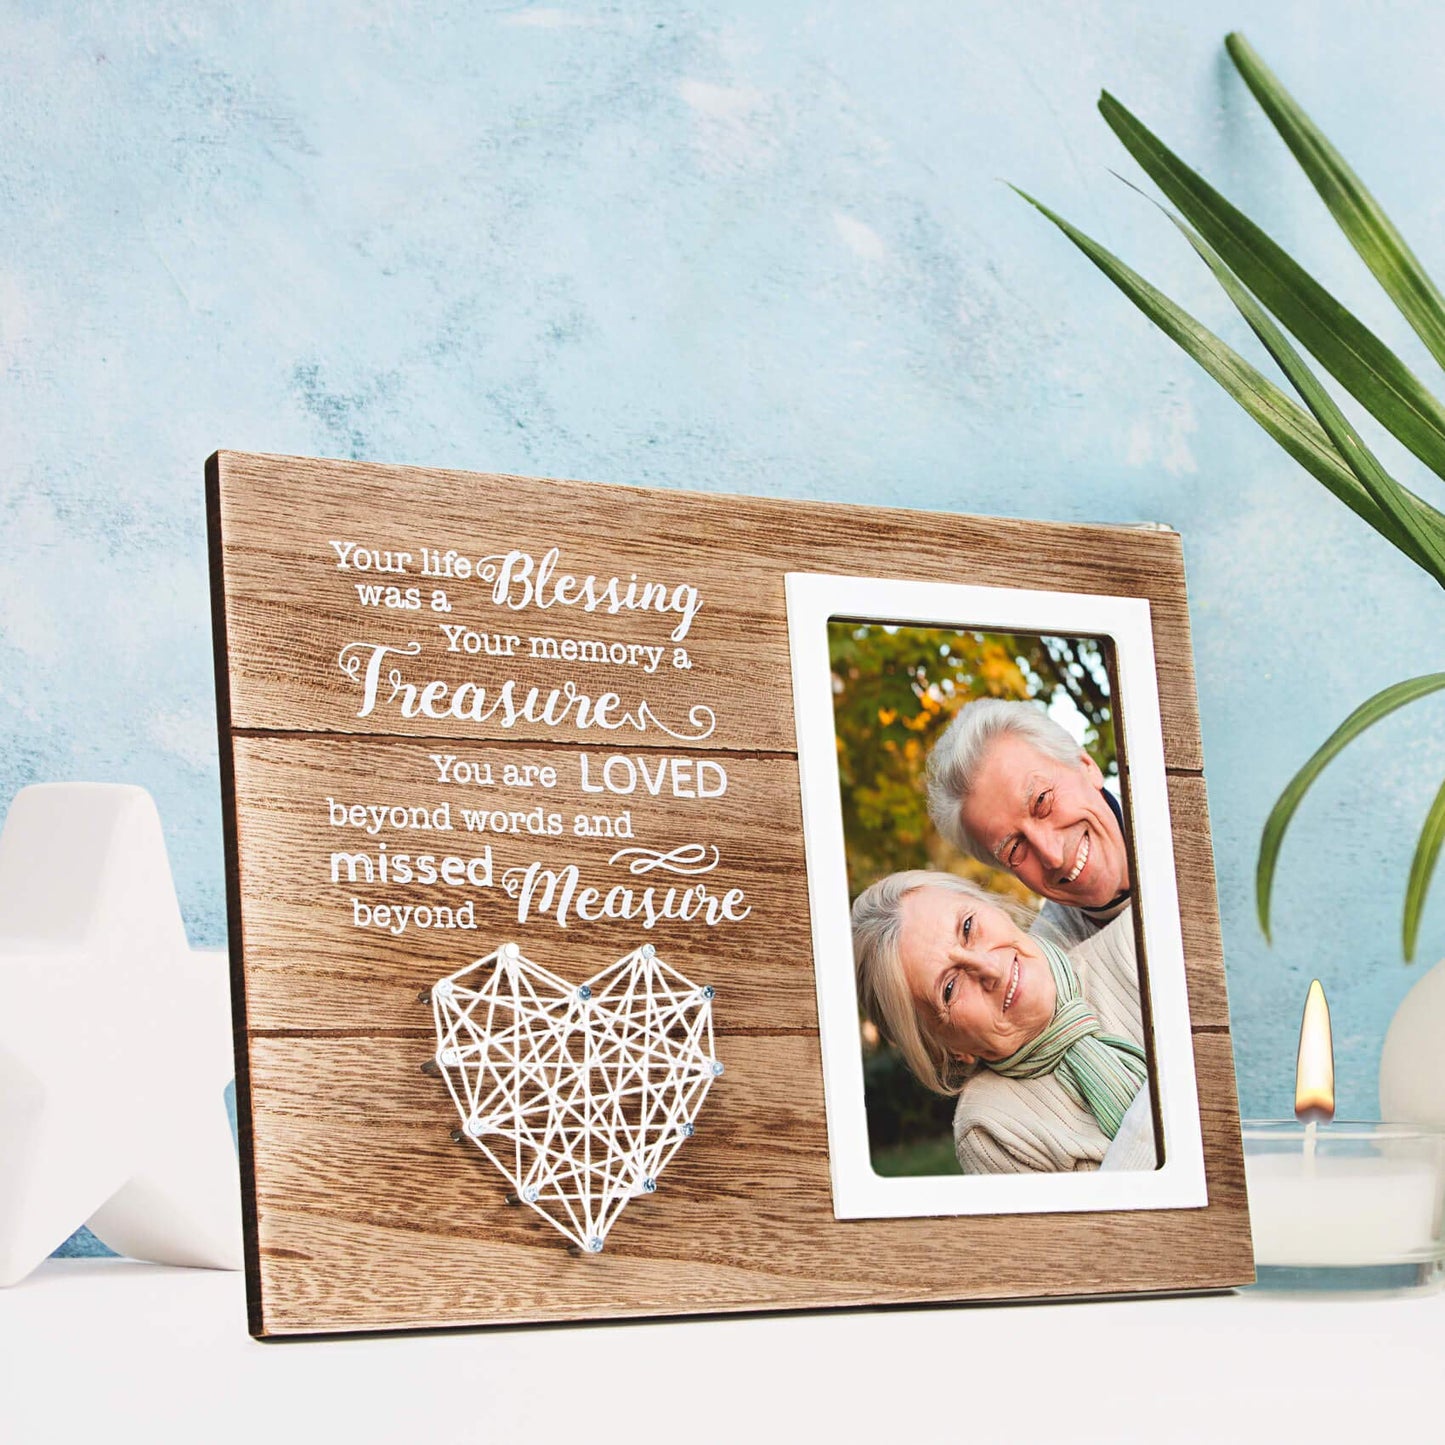 VILIGHT Memorial Picture Frame Sympathy Gifts for Loss of Loved One - Remembrance and Bereavement Present - 4x6 Photo